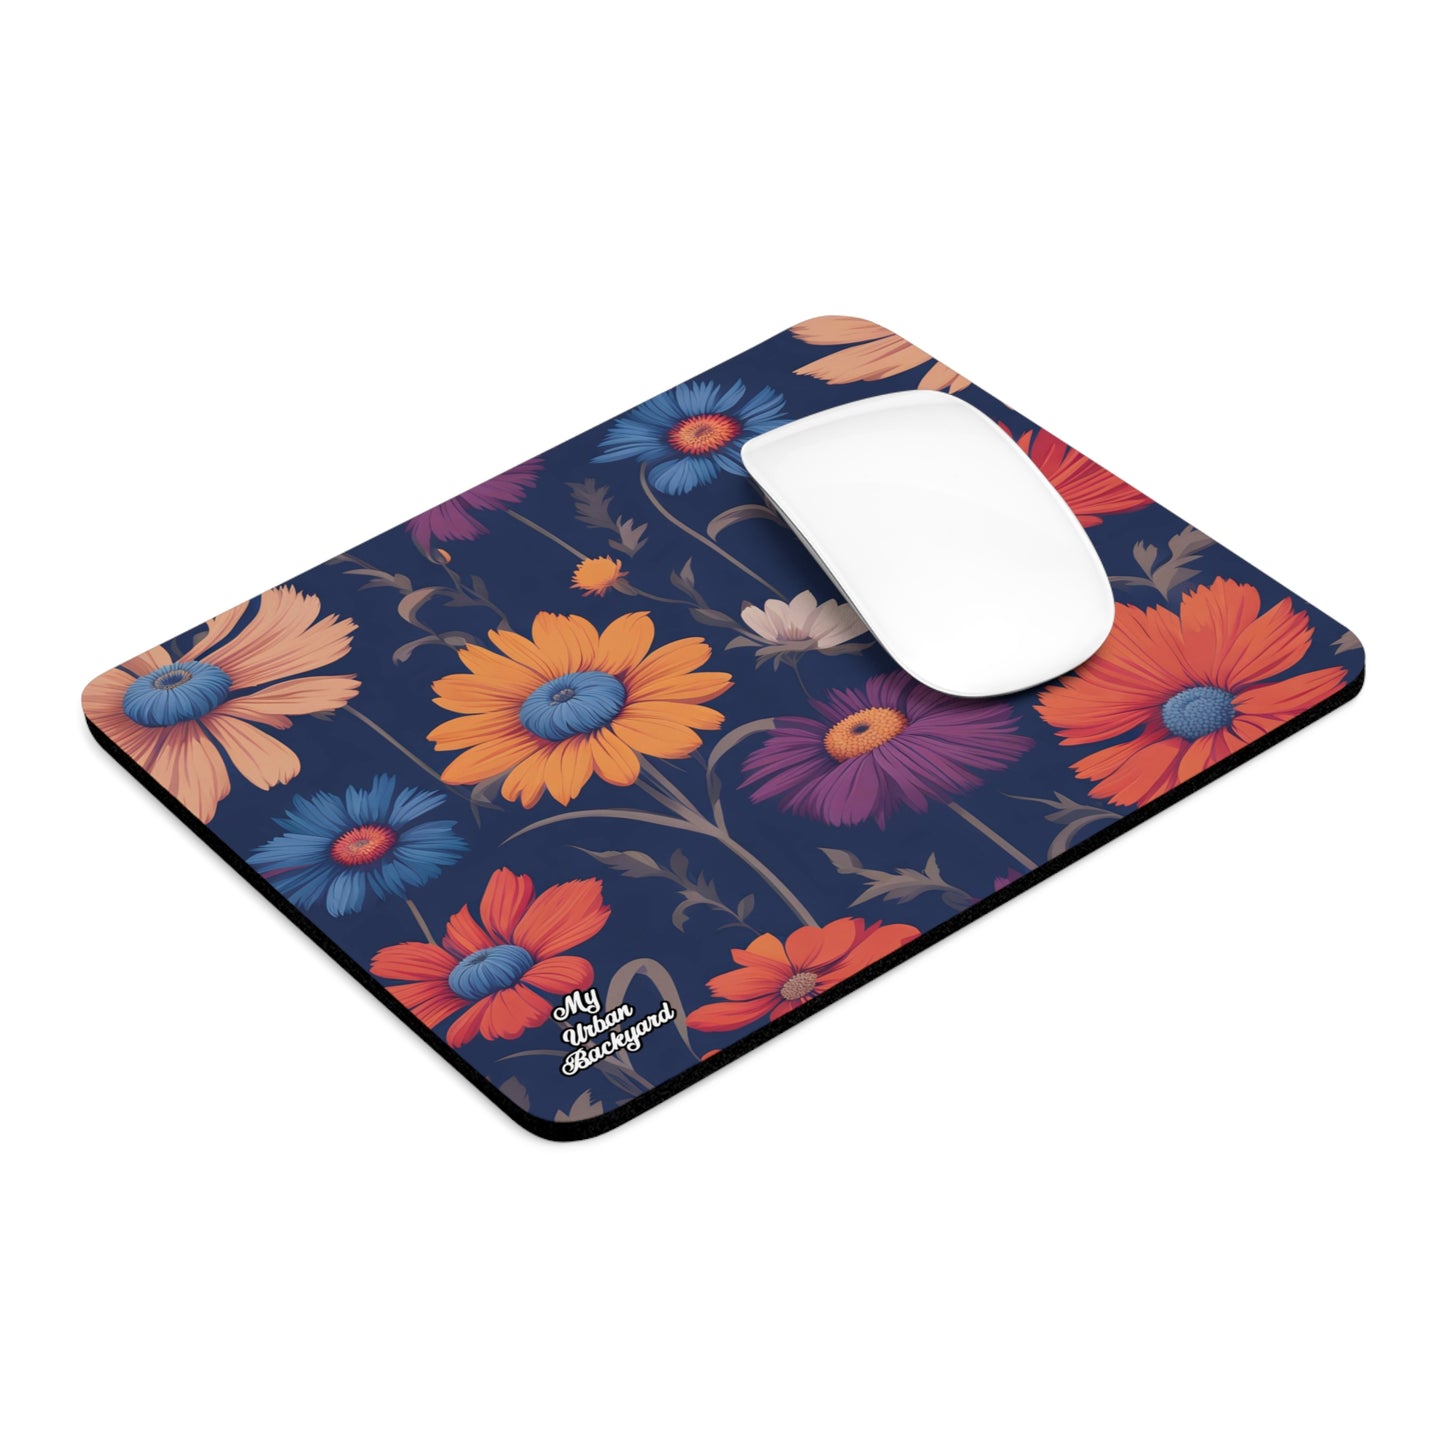 Fun Wildflowers, Computer Mouse Pad - for Home or Office